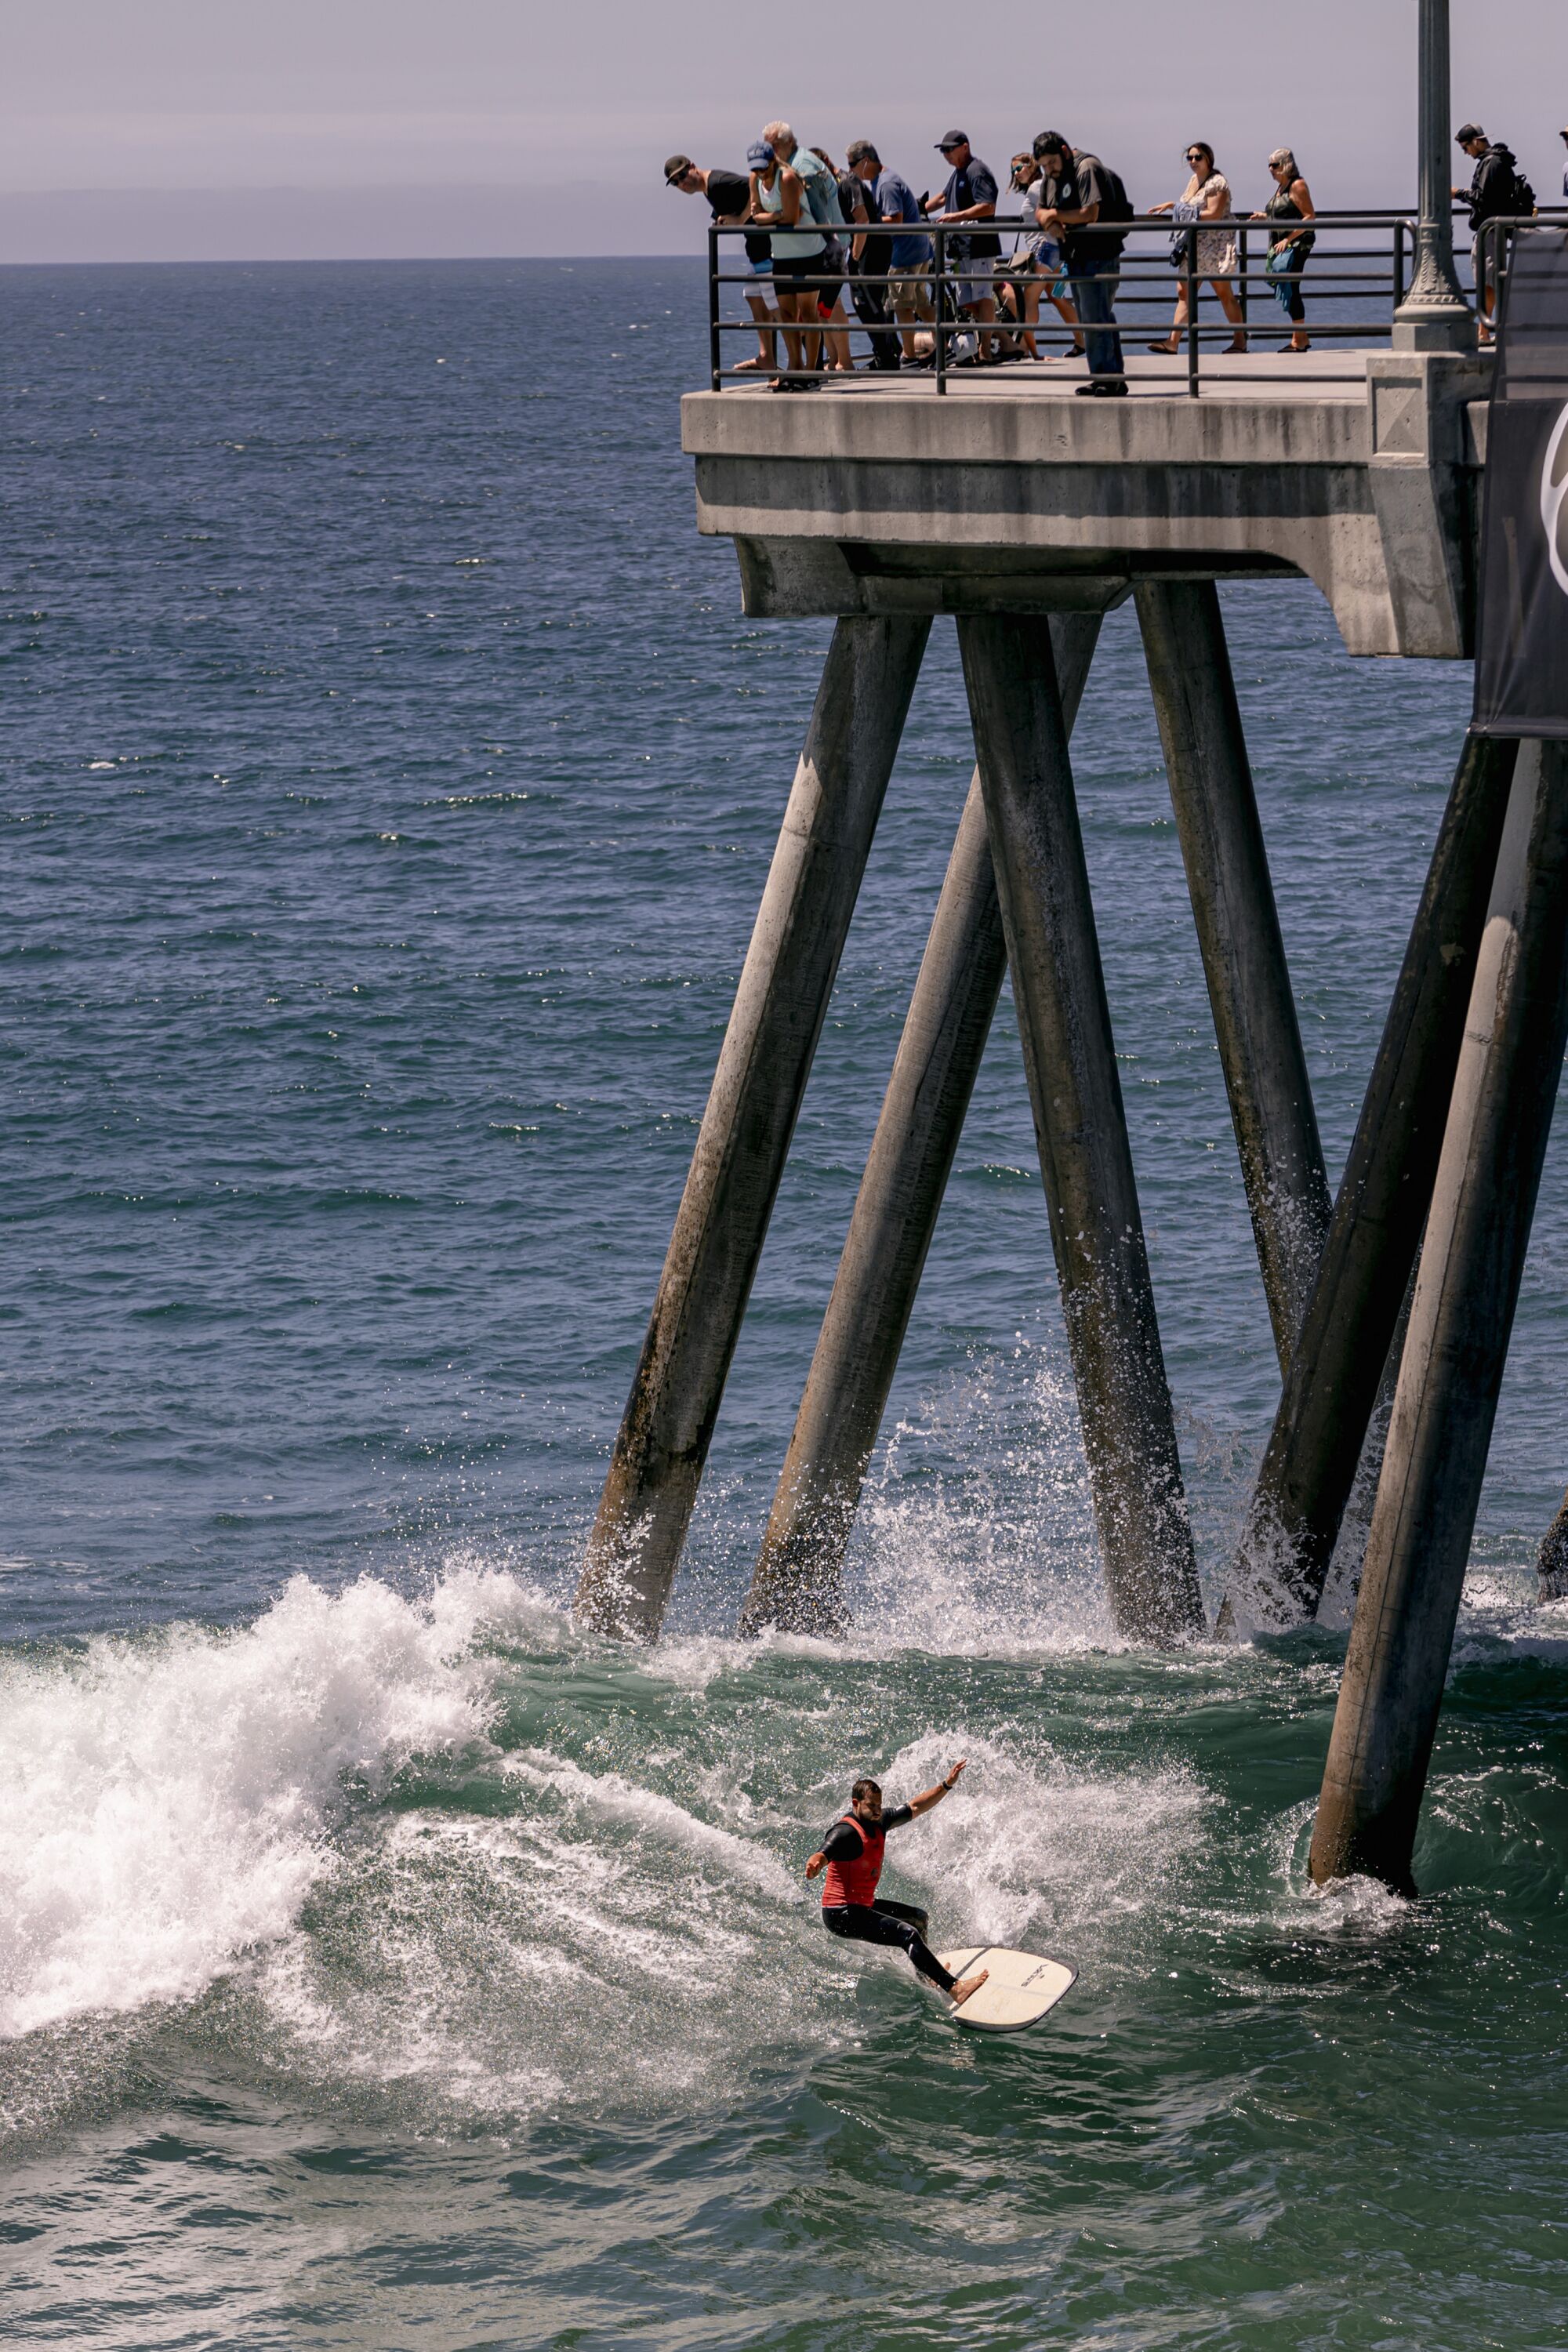 Justin Quintal competes in the US Open surf competition